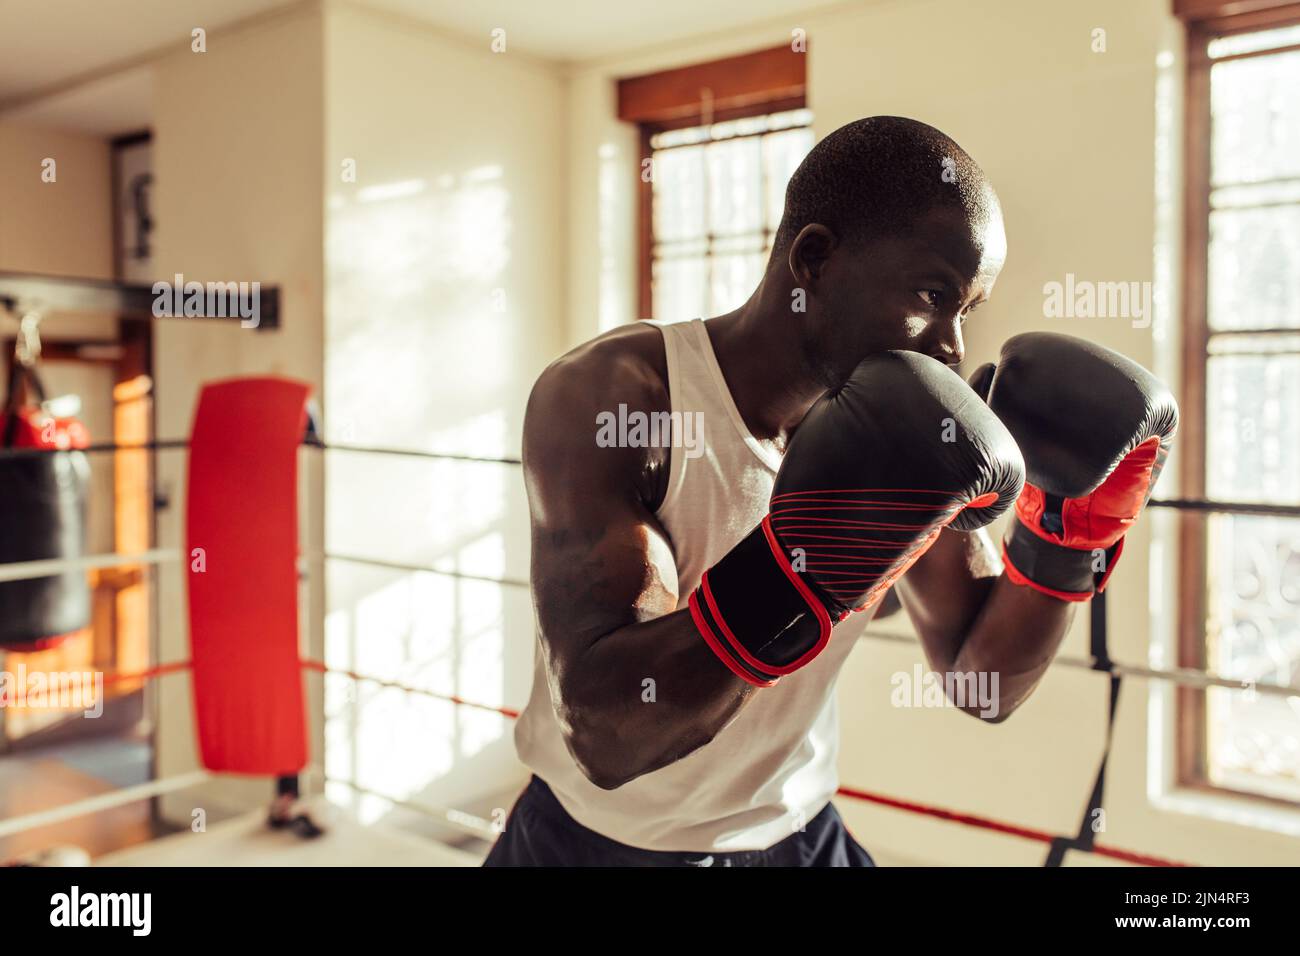 Young male boxer standing in a fighting position while wearing boxing gloves. Sporty young man having a boxing training session in a gym. Stock Photo